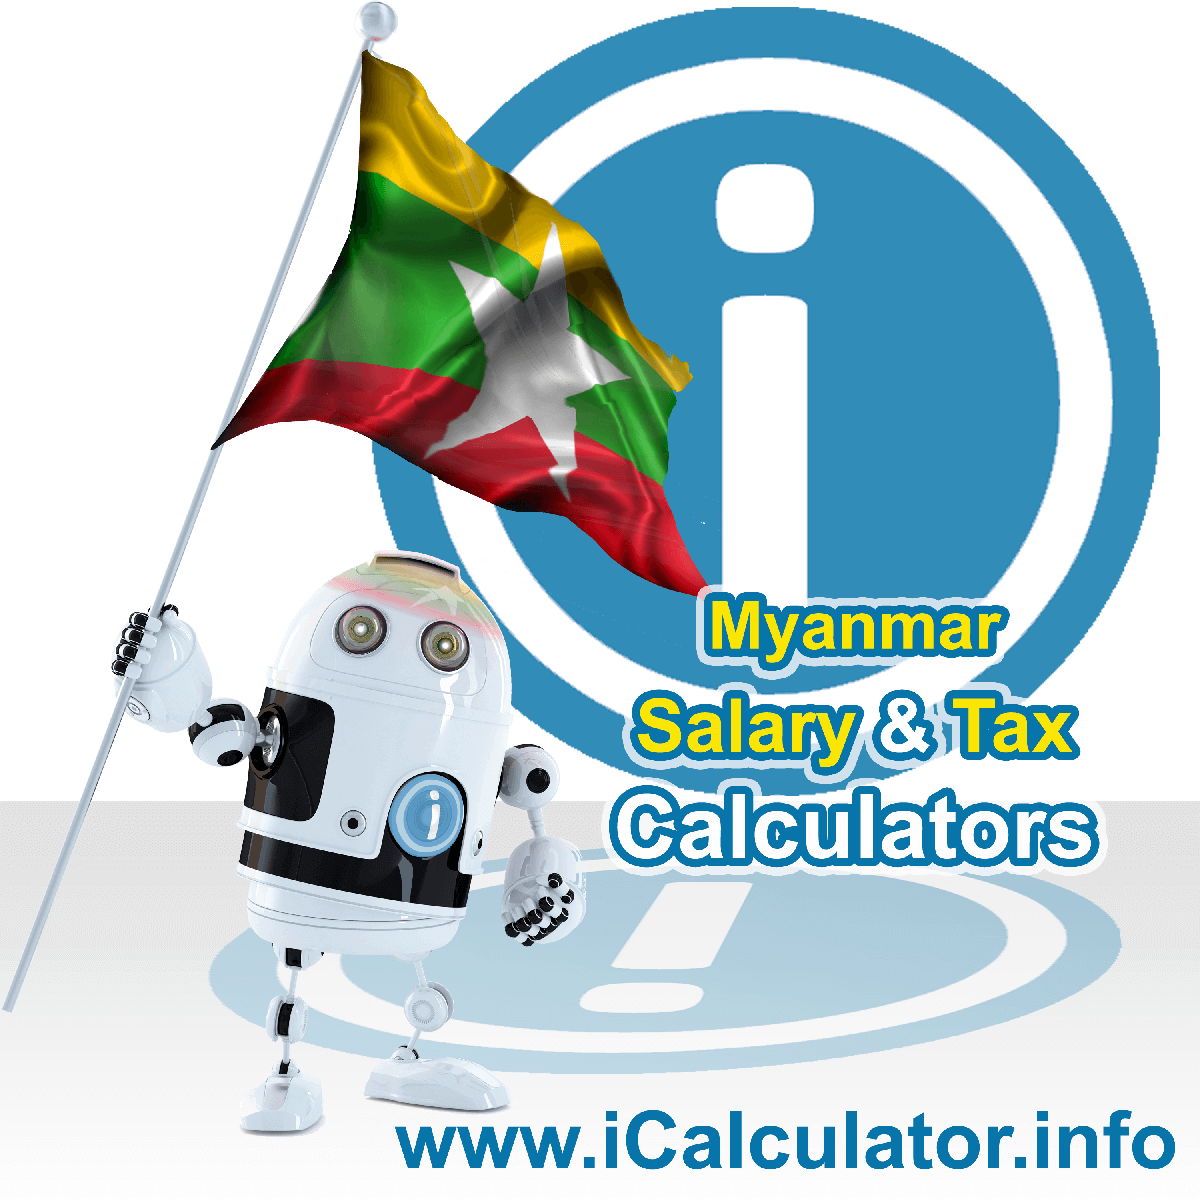 Myanmar Salary Calculator. This image shows the Myanmarese flag and information relating to the tax formula for the Myanmar Tax Calculator